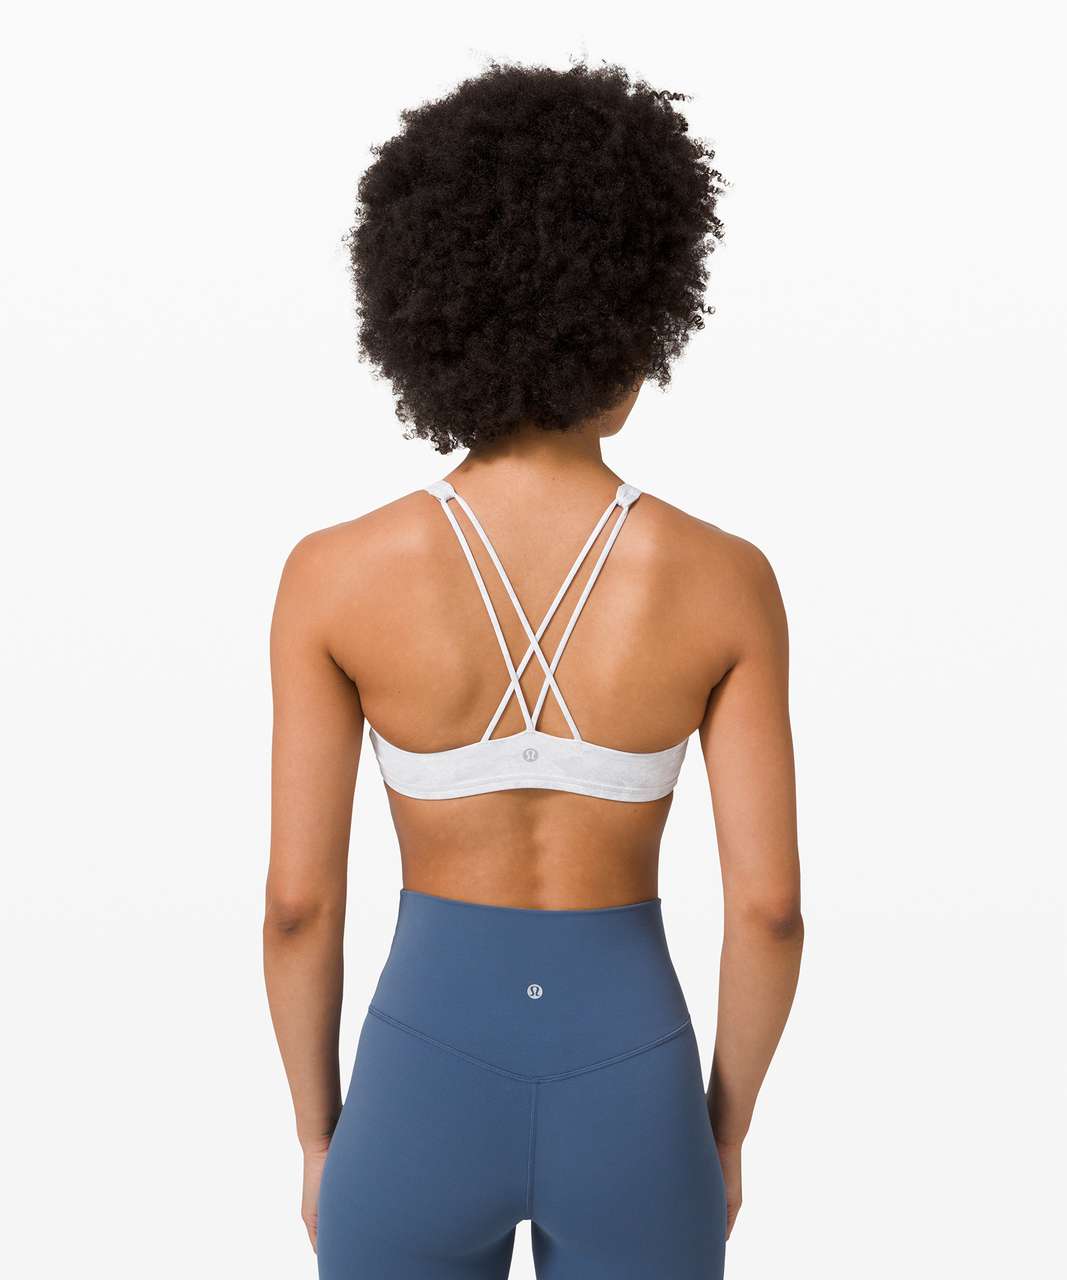 Lululemon Free To Be Bra *Light Support, A/B Cup (Online Only) - Future Oasis Grey Multi